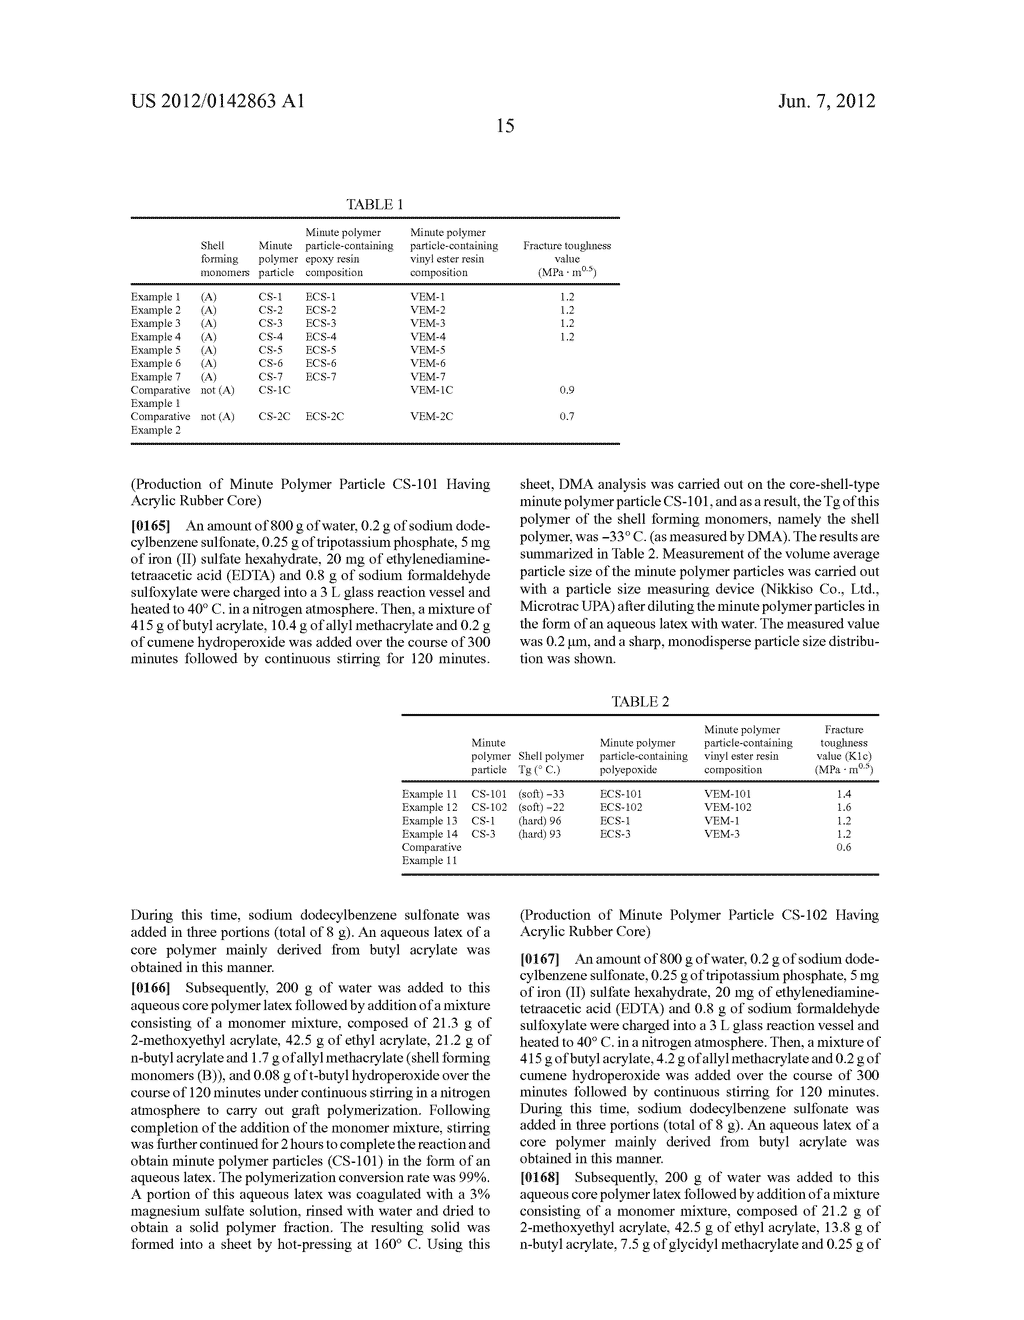 VINYL ESTER RESIN COMPOSITION THAT CONTAINS MINUTE POLYMER PARTICLES,     PROCESS FOR PRODUCTION OF SAME, AND CURED PRODUCTS OF SAME - diagram, schematic, and image 16